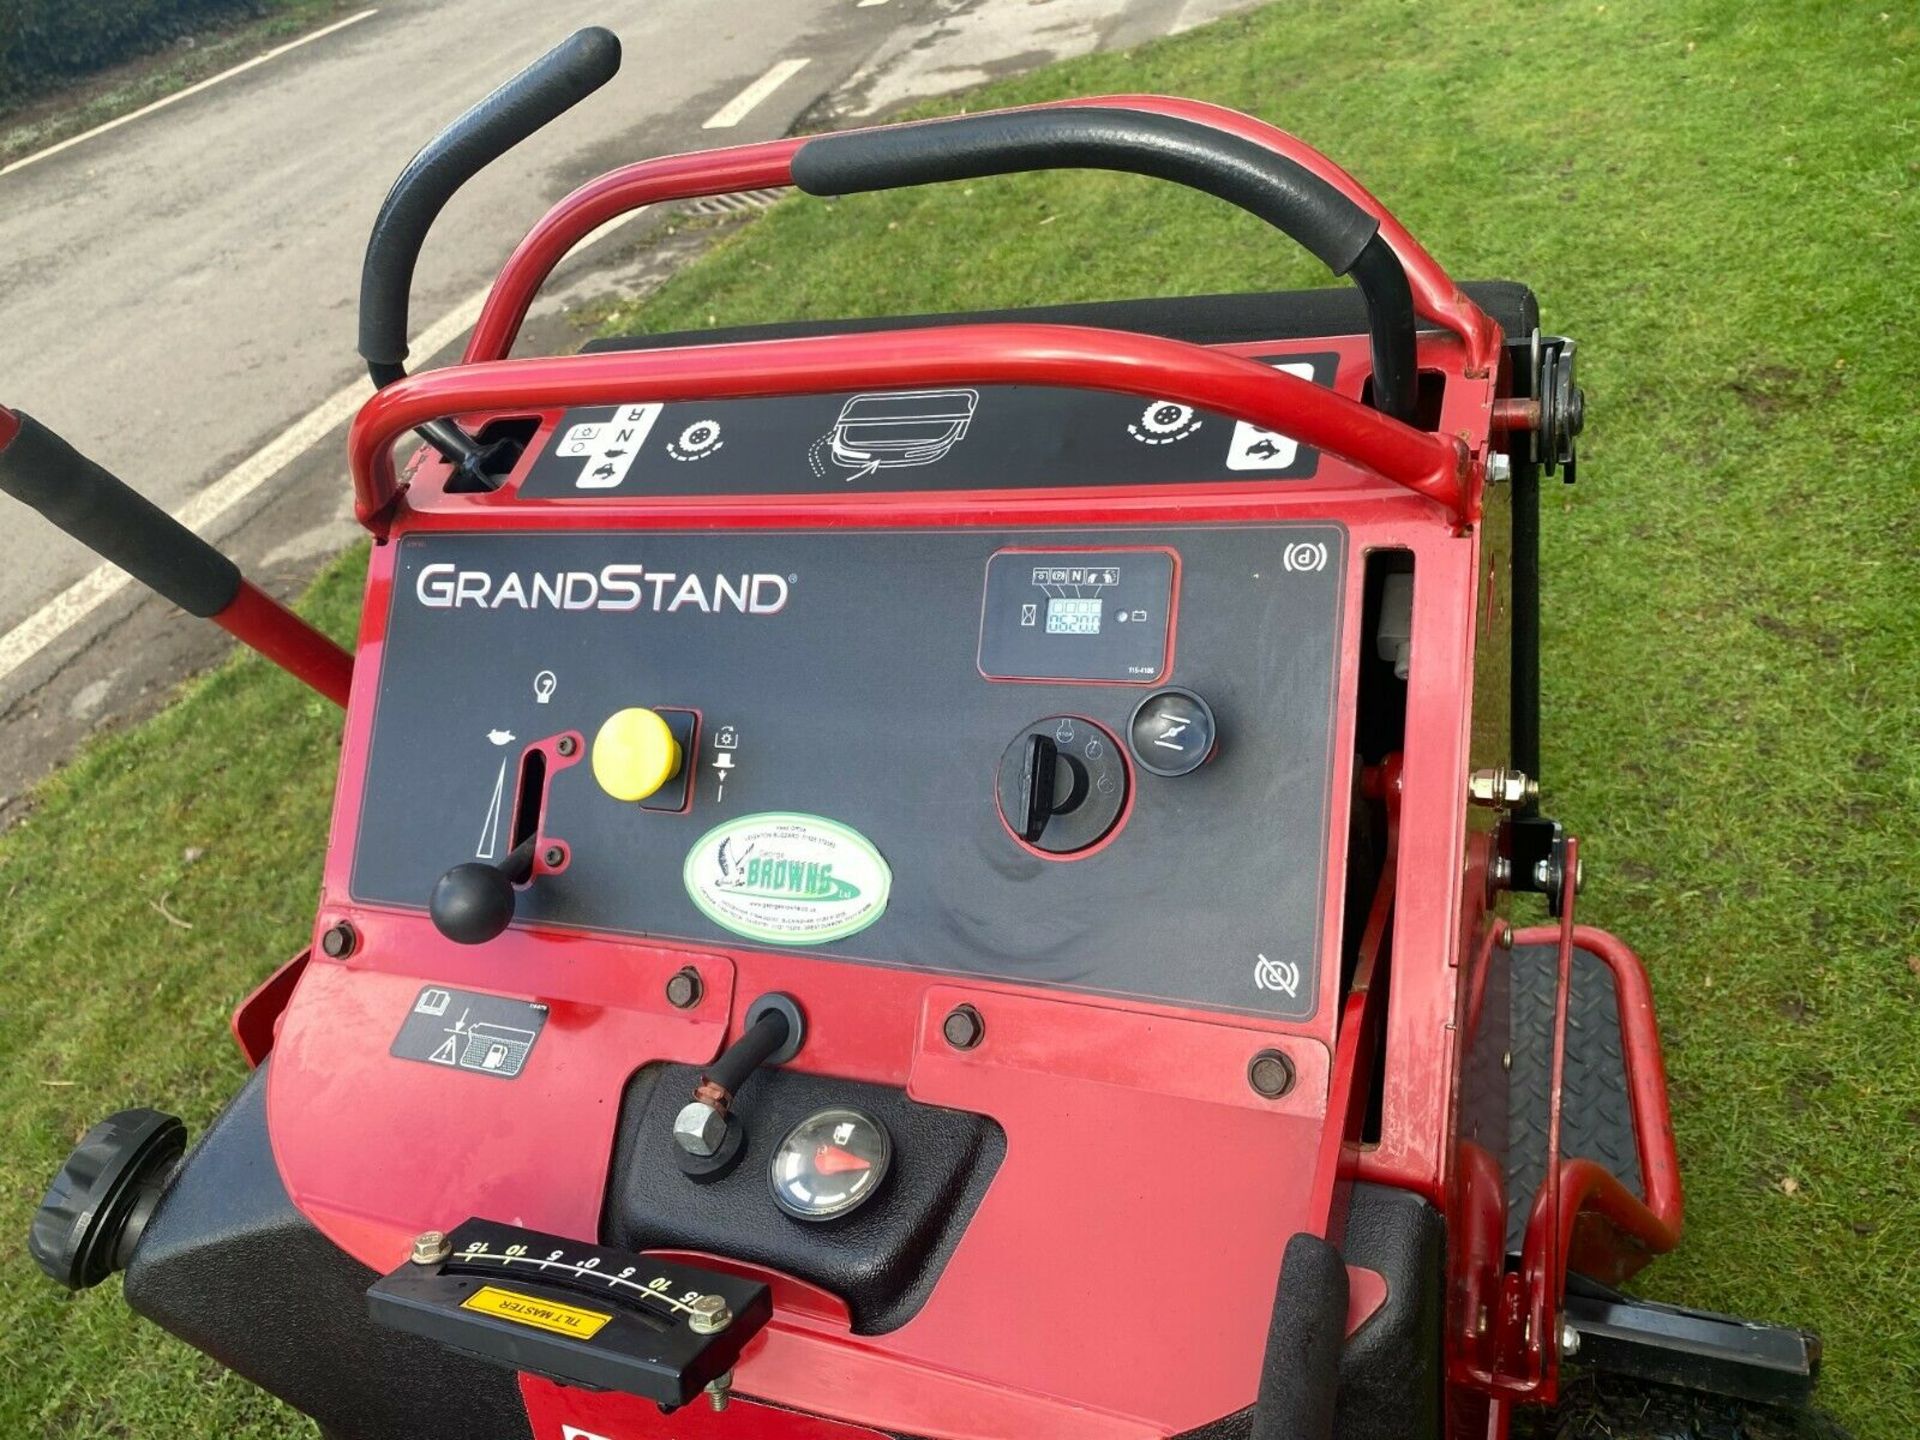 TORO GRANDSTAND STAND ON MOWER, ZERO TURN, 620 HOURS FROM NEW, MANUFACTURED YEAR 2015. - Image 5 of 6